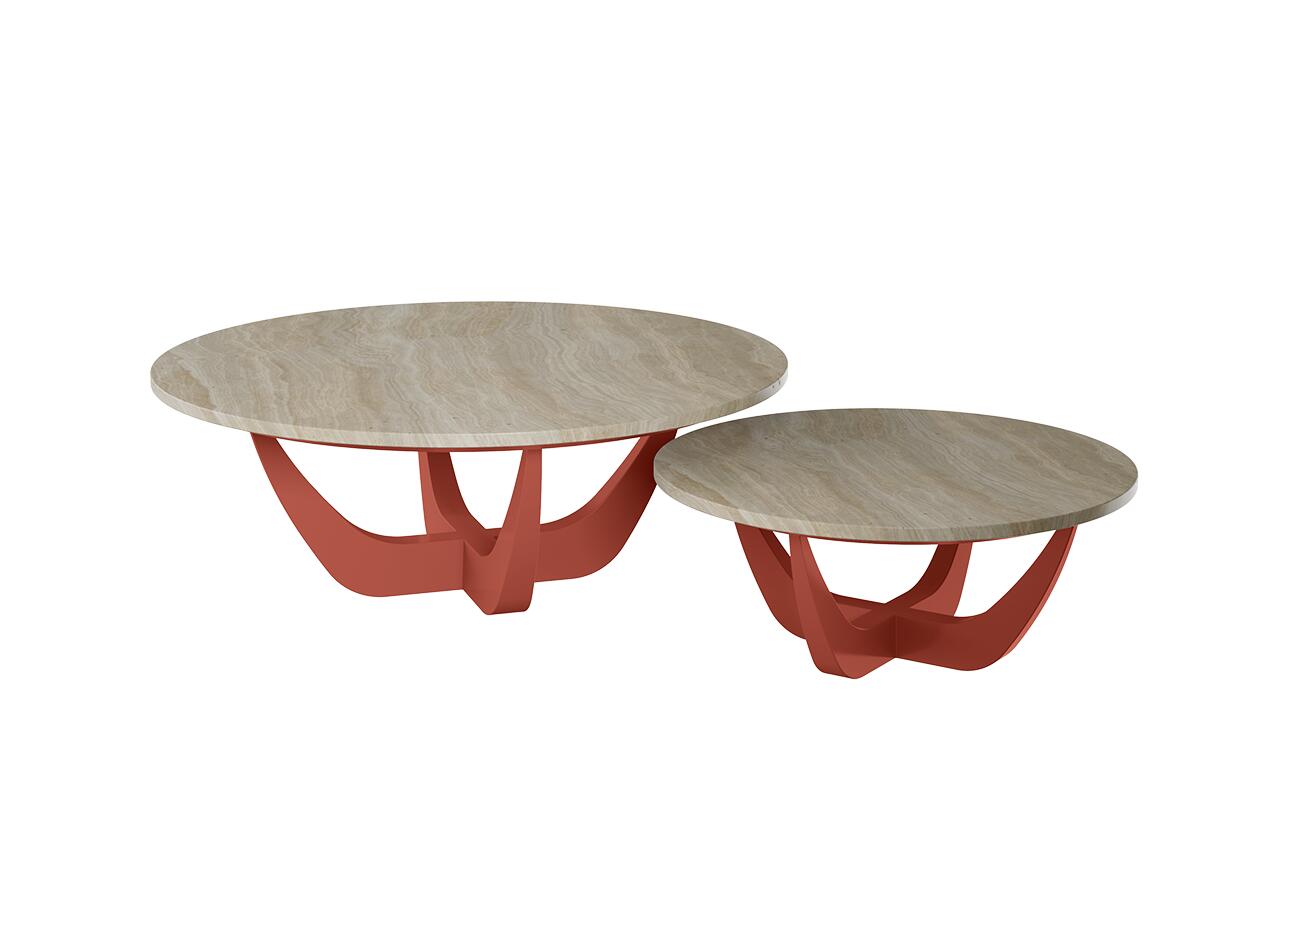 Canopy center table